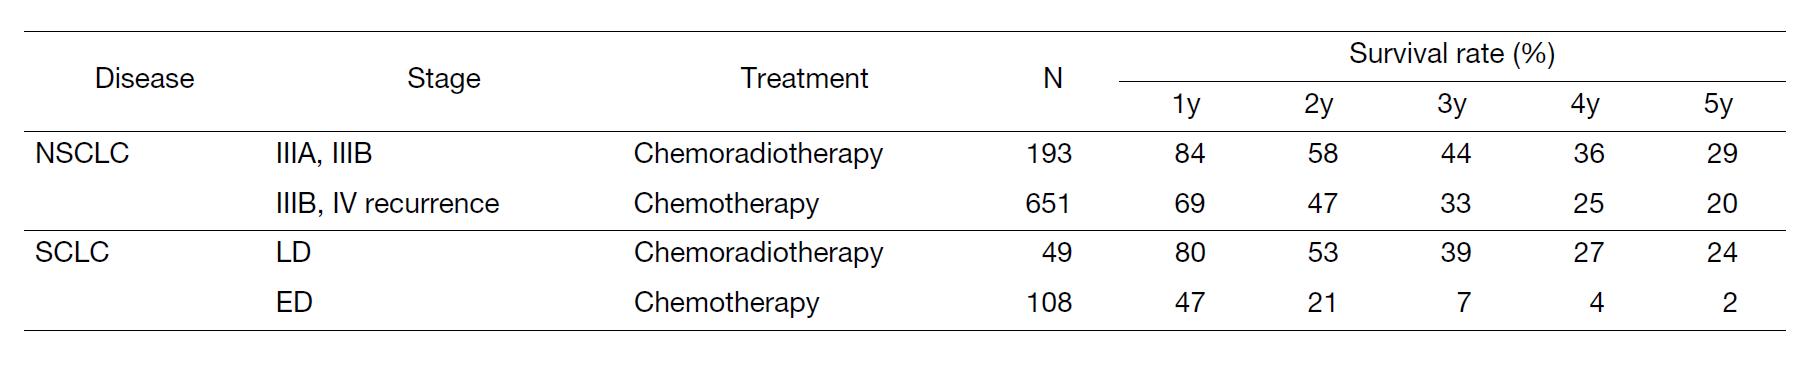 Table 3. Survival rates of lung cancer patients treated in 2012-2016